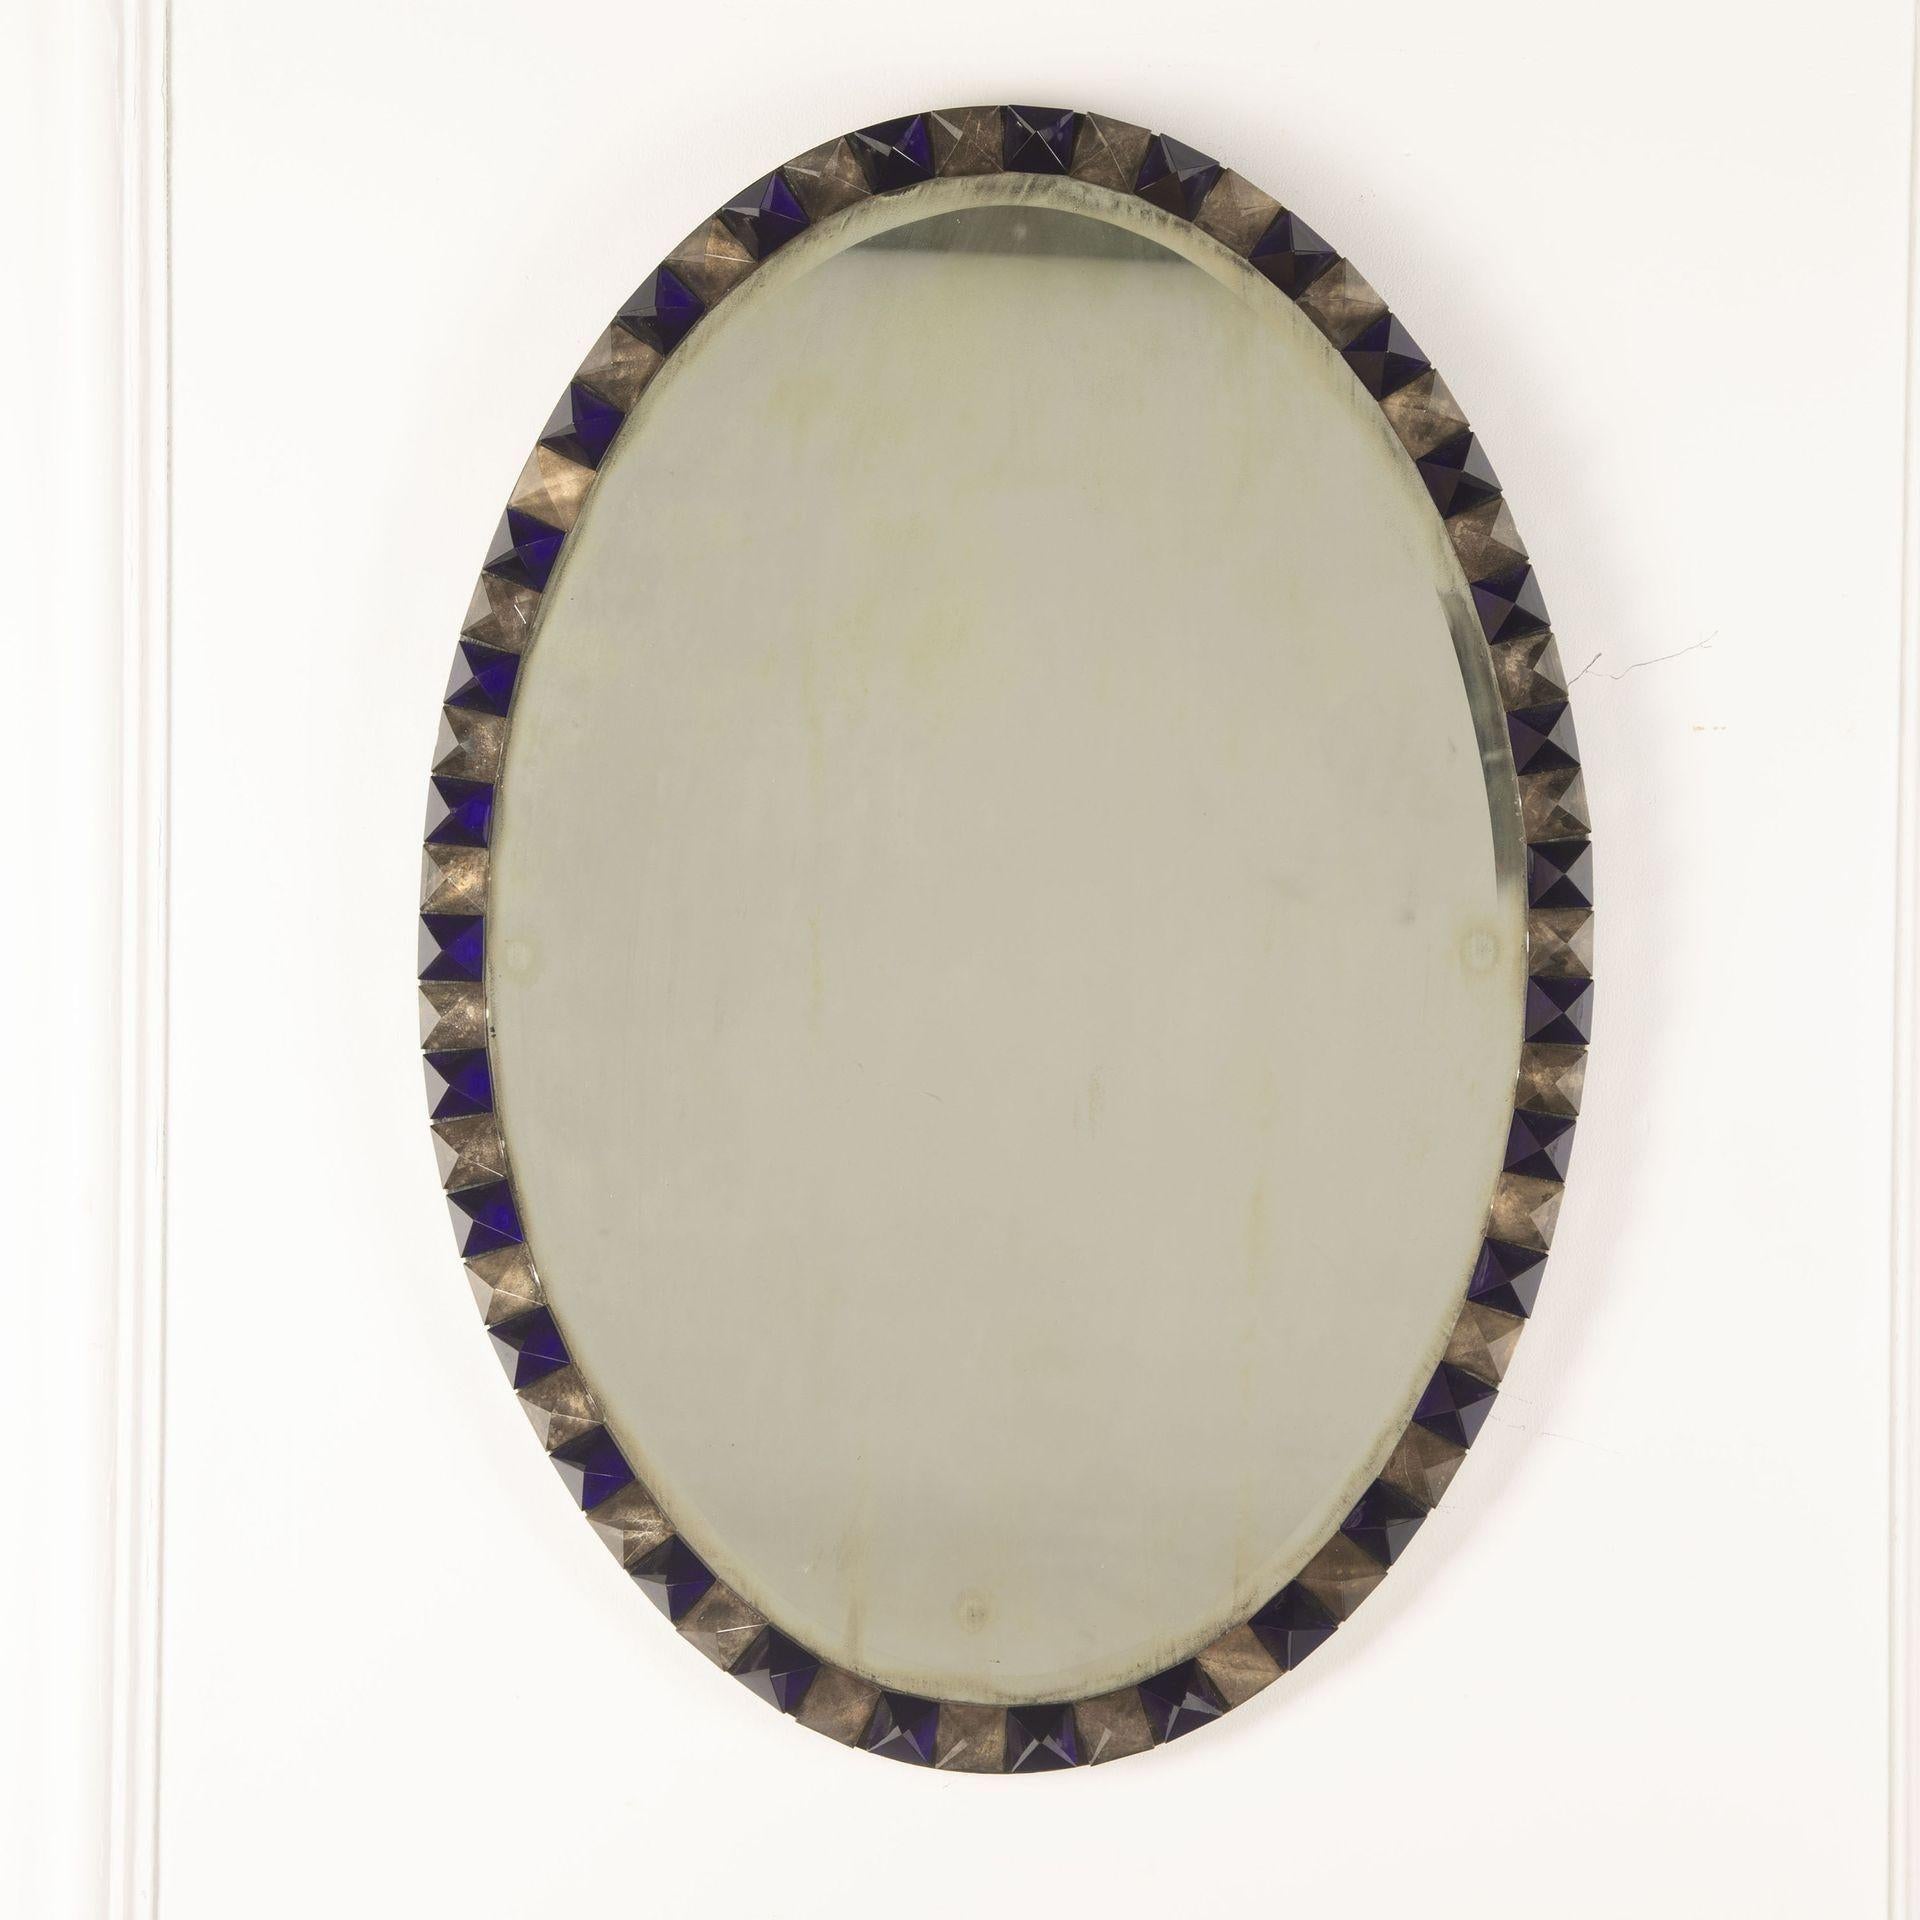 Mid 20th century mirror within an indigo and clear glass segmented frame.
Wear to mirror consistent with age.